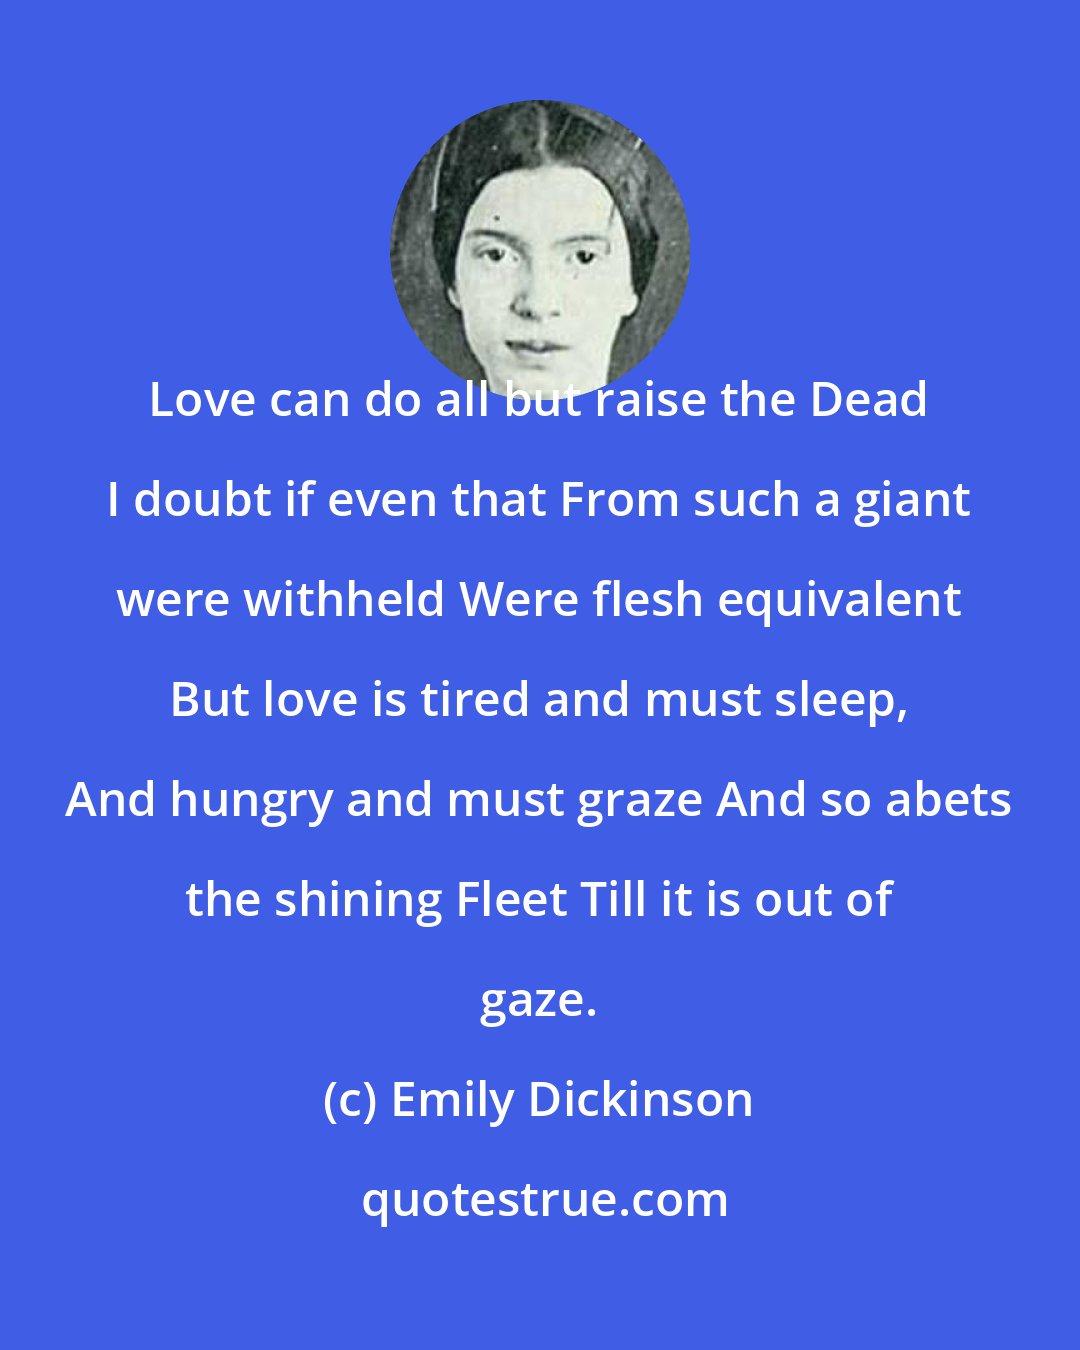 Emily Dickinson: Love can do all but raise the Dead I doubt if even that From such a giant were withheld Were flesh equivalent But love is tired and must sleep, And hungry and must graze And so abets the shining Fleet Till it is out of gaze.